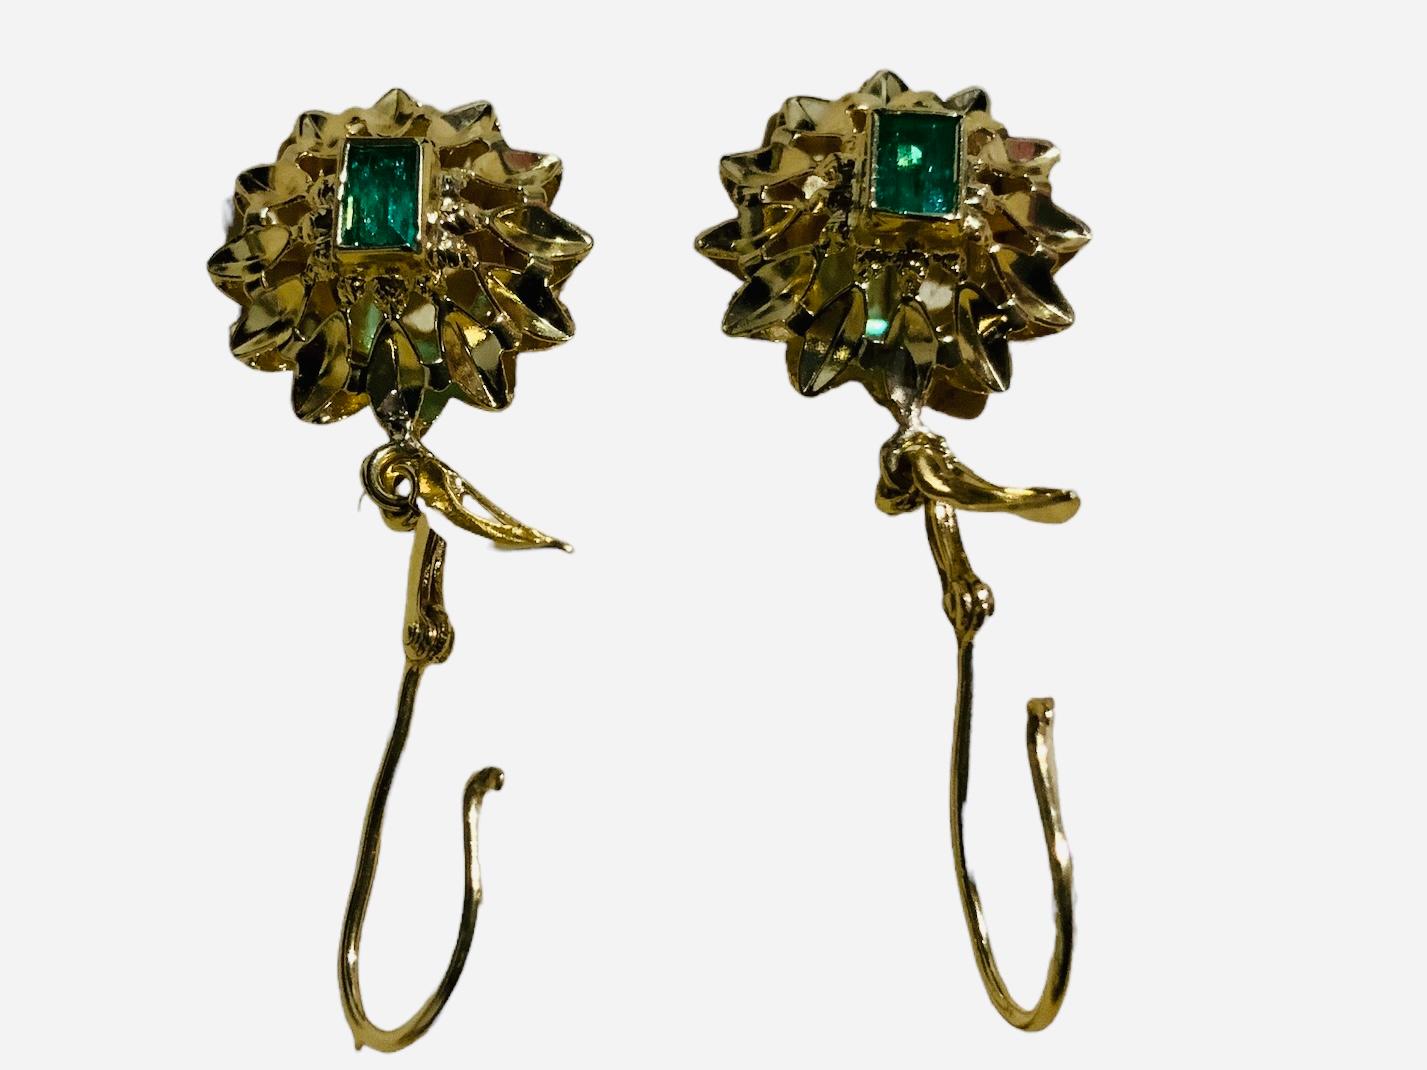  18K Yellow Gold Emerald Pair of Drop Earrings In Good Condition For Sale In Guaynabo, PR